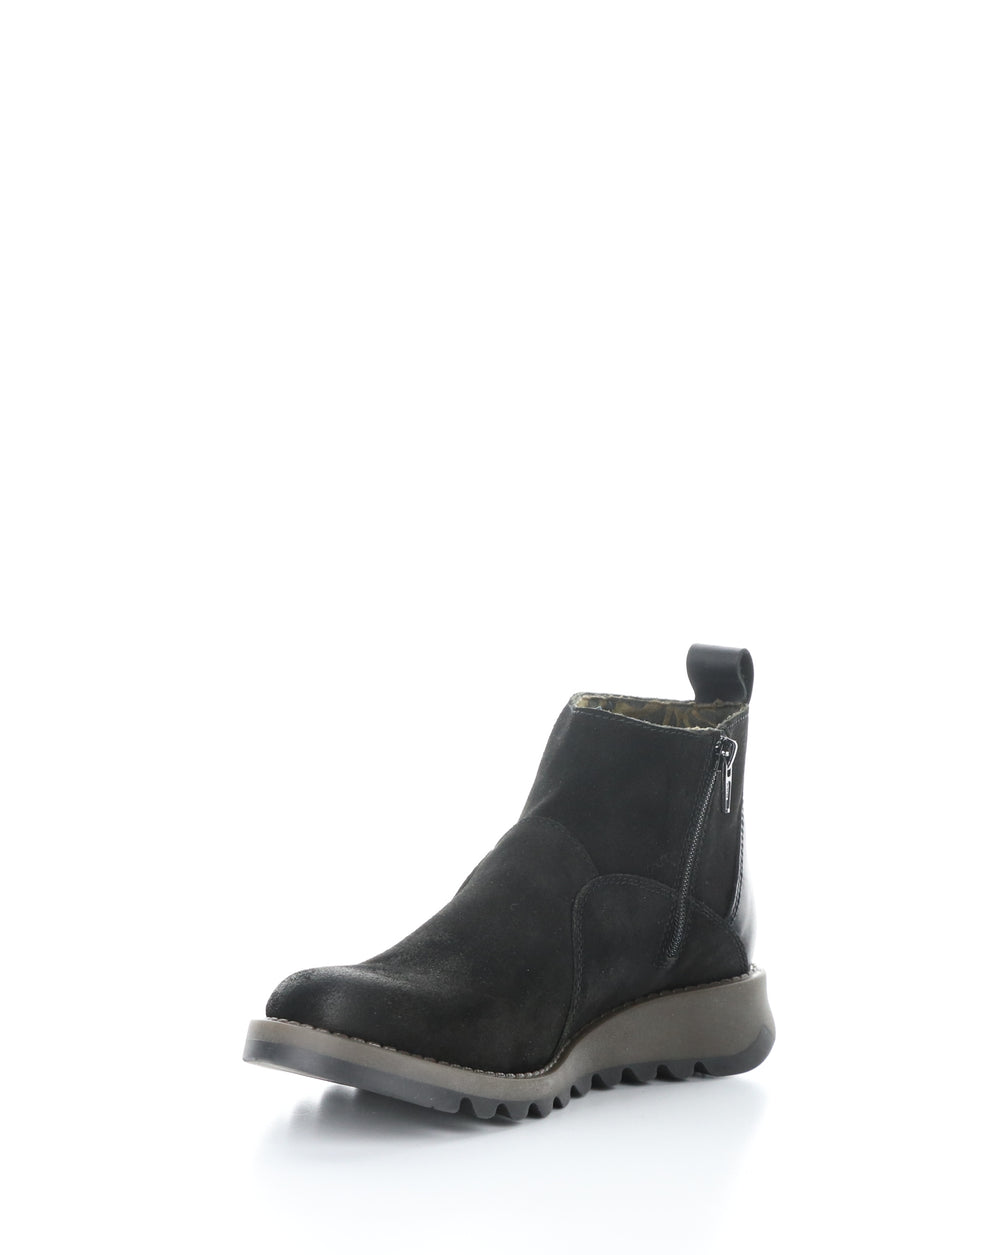 SELY918FLY 004 BLACK Round Toe Boots